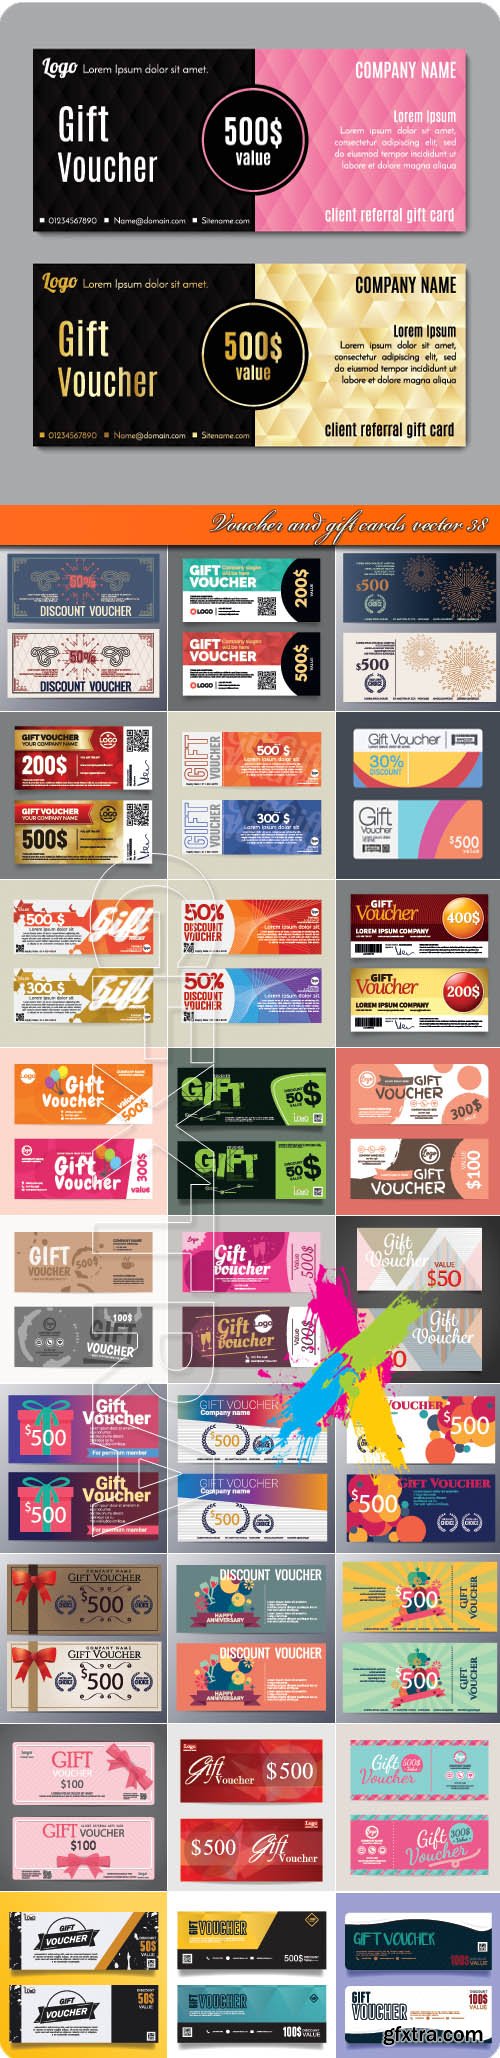 Voucher and gift cards vector 38